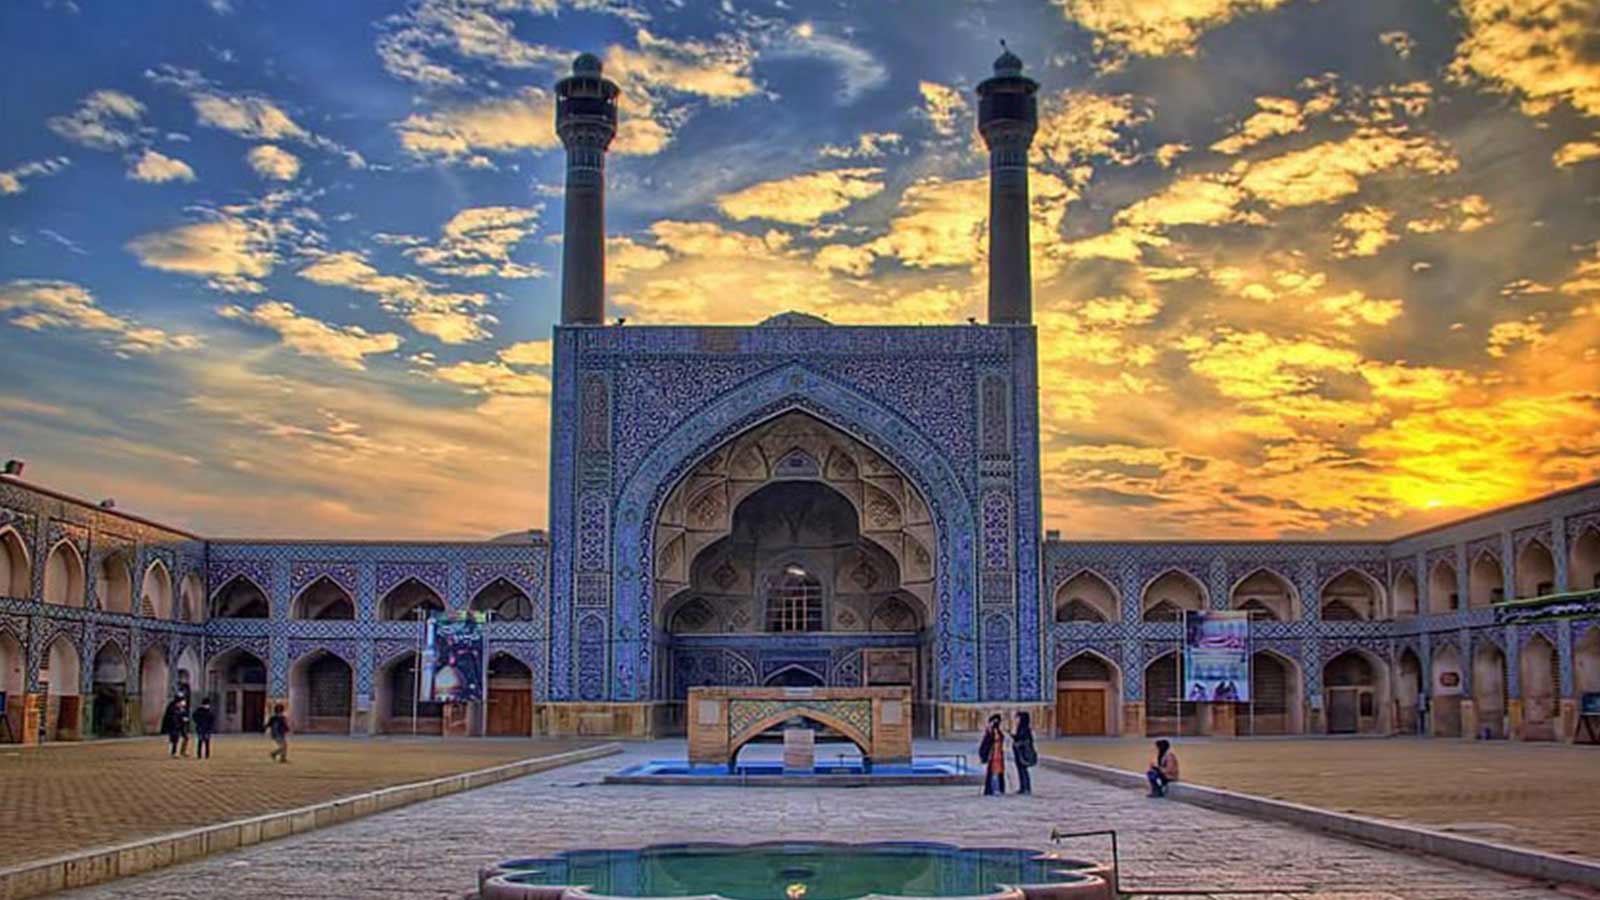 Jame’ Mosque of Isfahan-هاشور